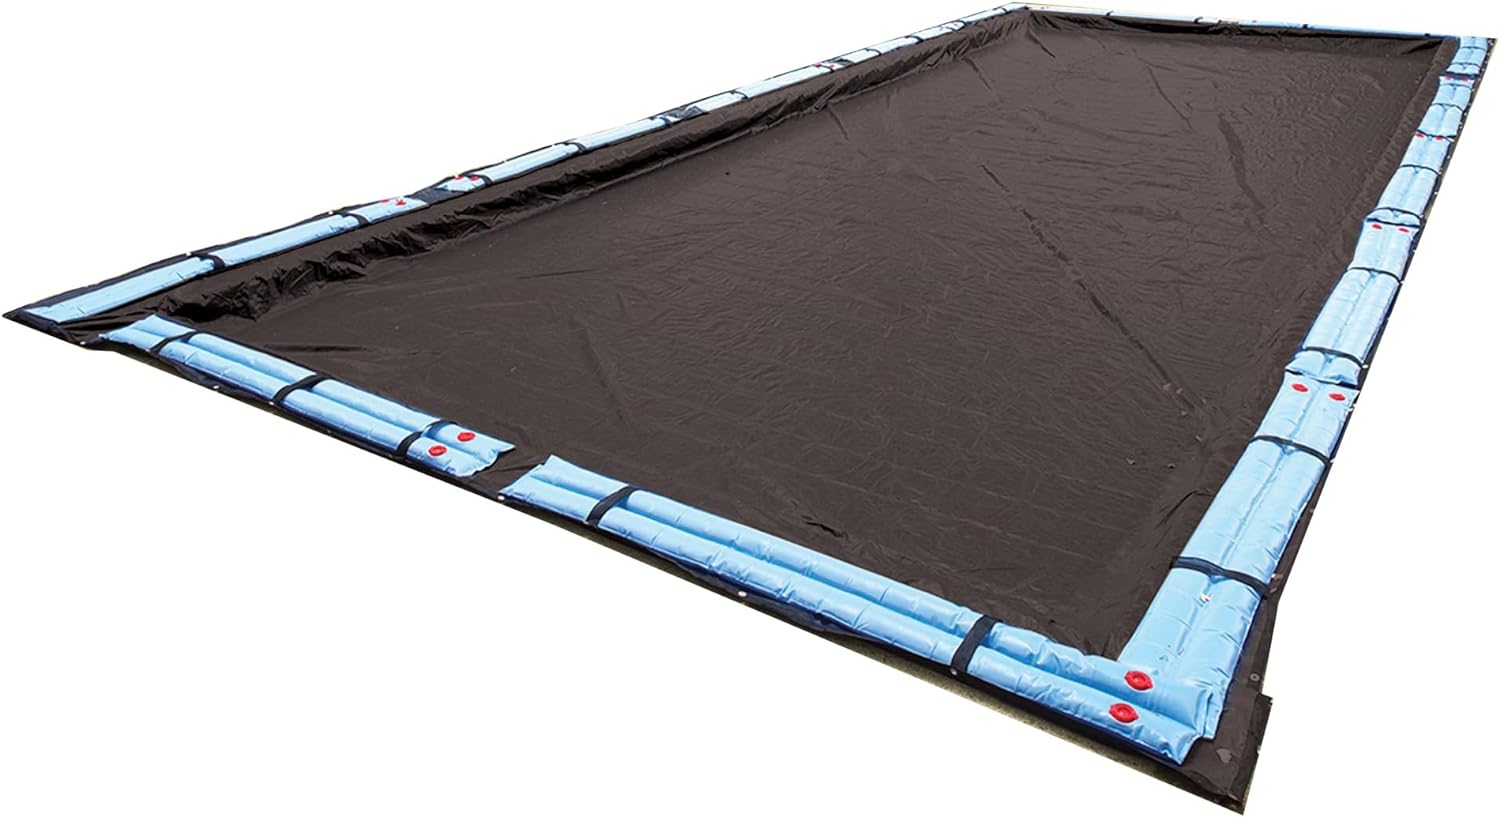 Royal 12' x 24' Pool Size - 17' x 29' Rect. Cover 10 Year Warranty